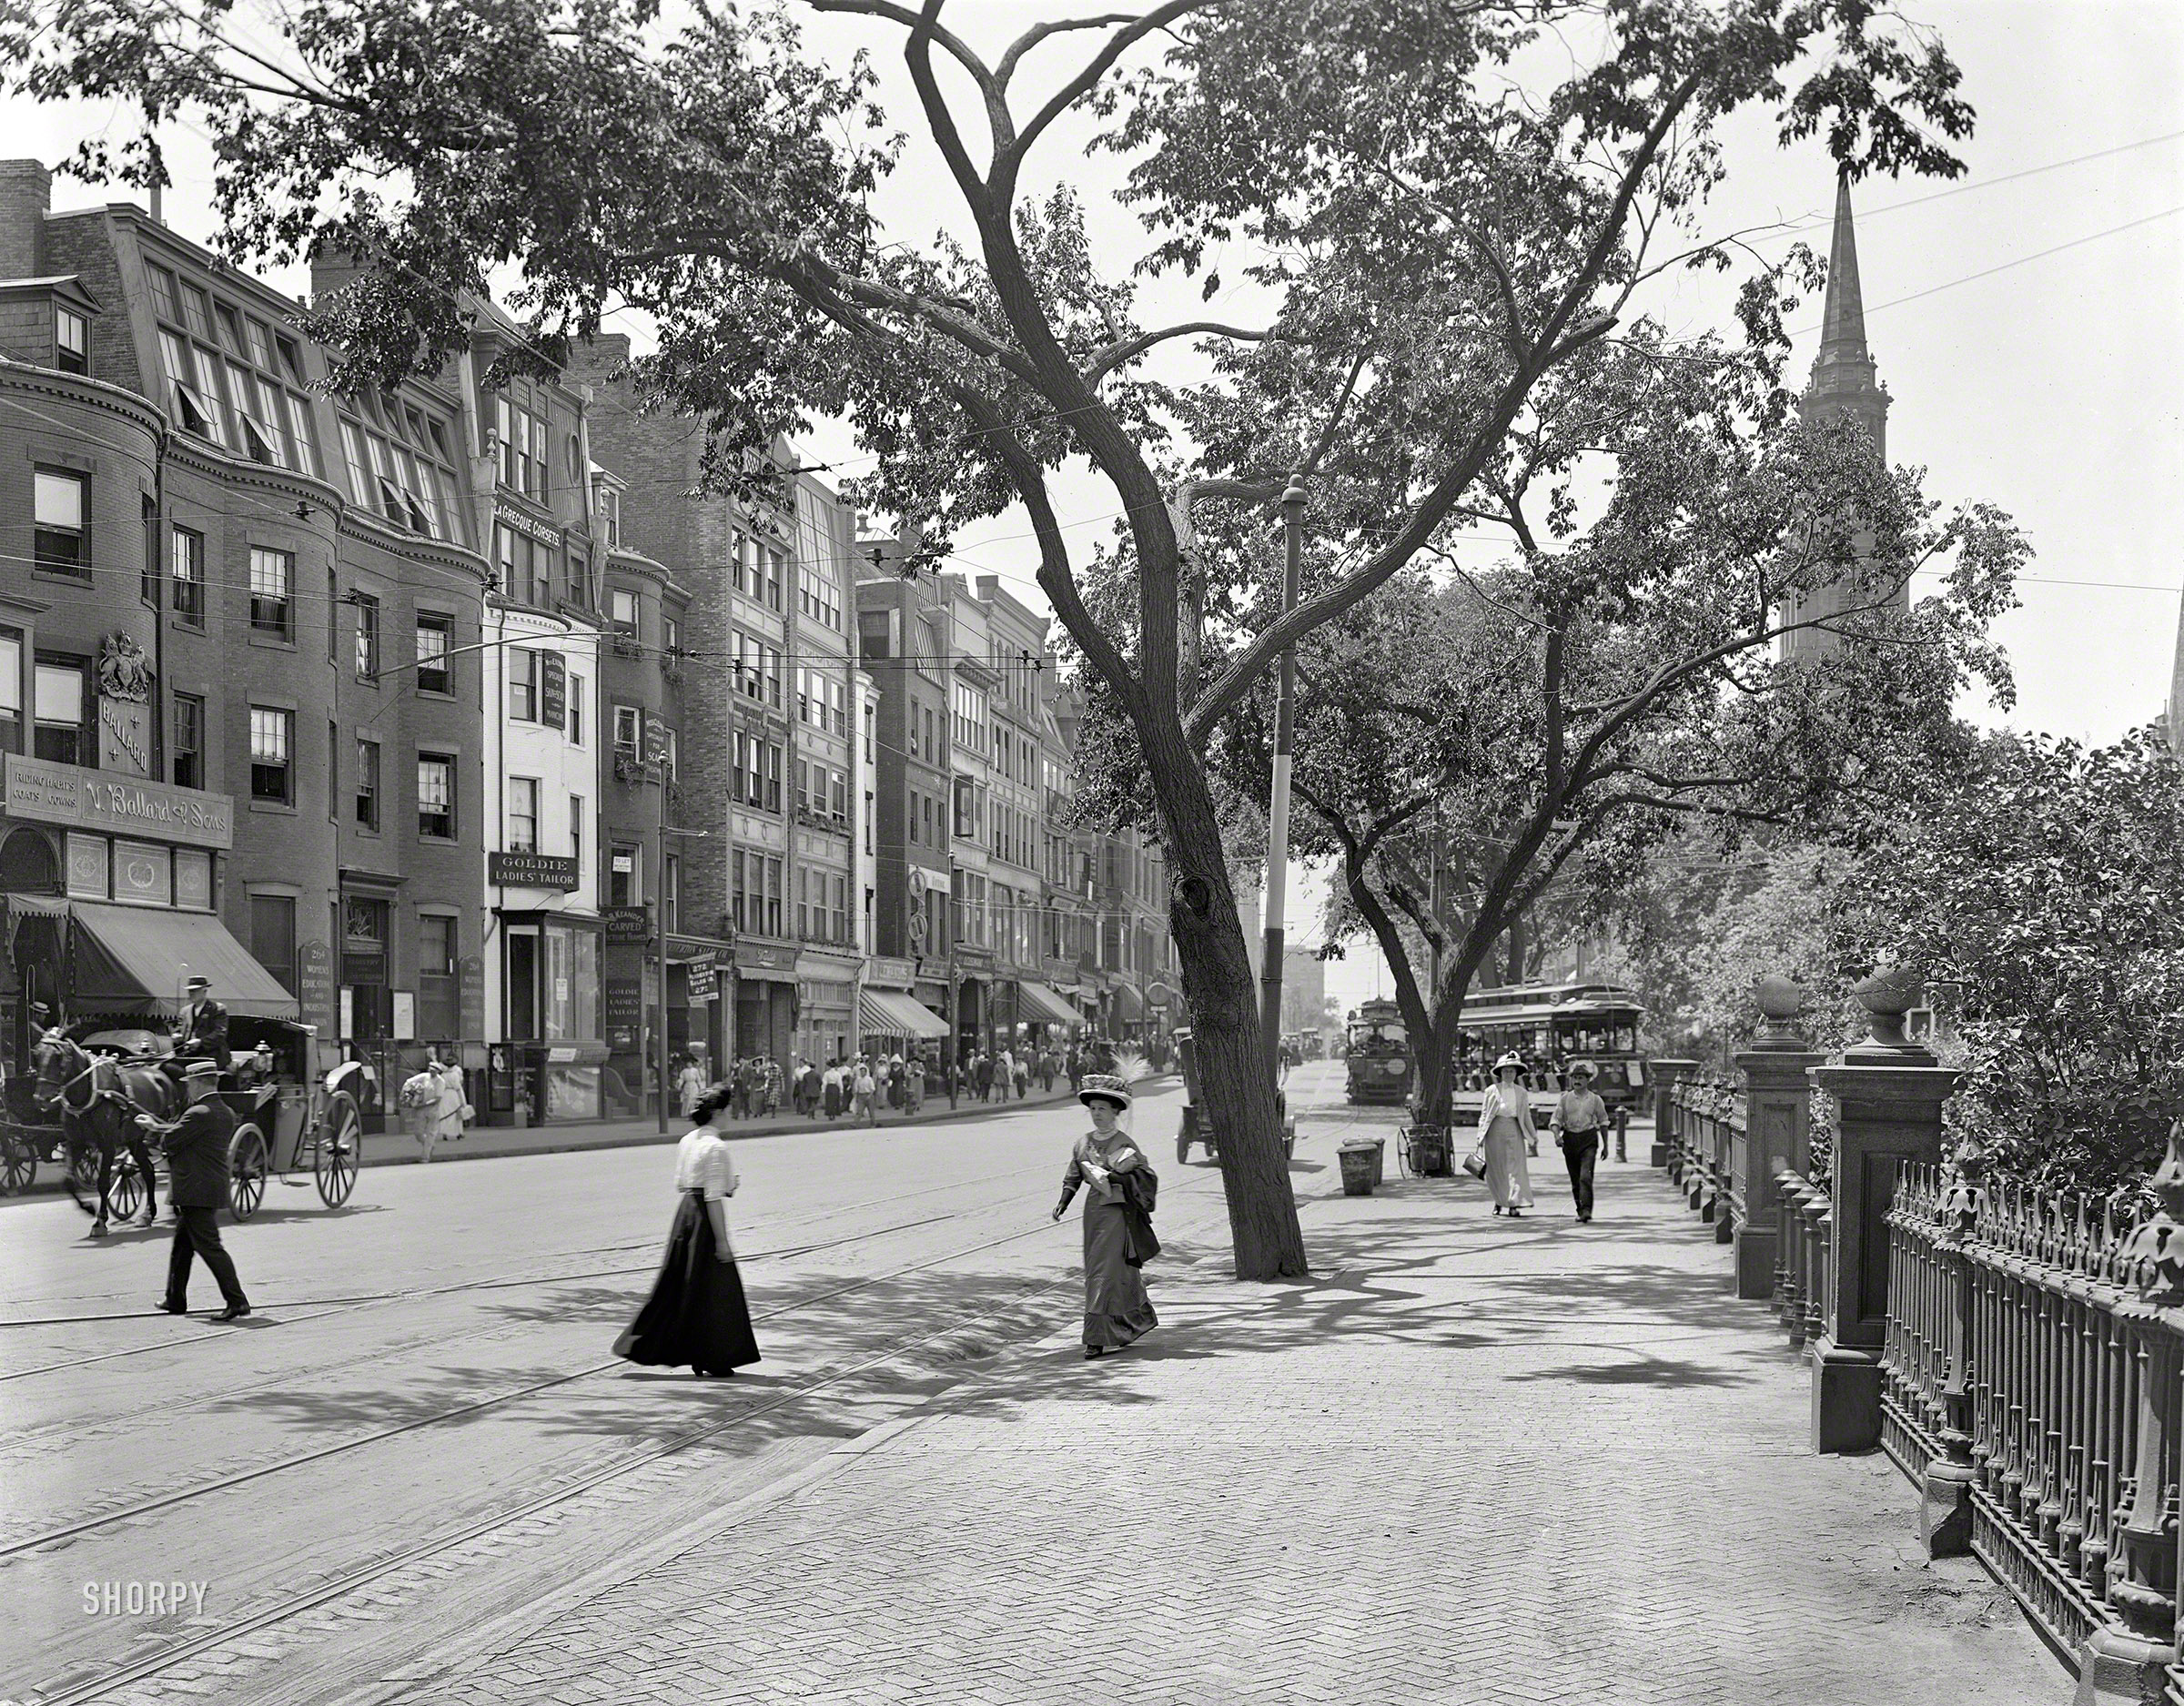 Boston circa 1910. "Boylston Street." The place to go for corsets and riding habits. 8x10 inch dry plate glass negative, Detroit Publishing Company. View full size.